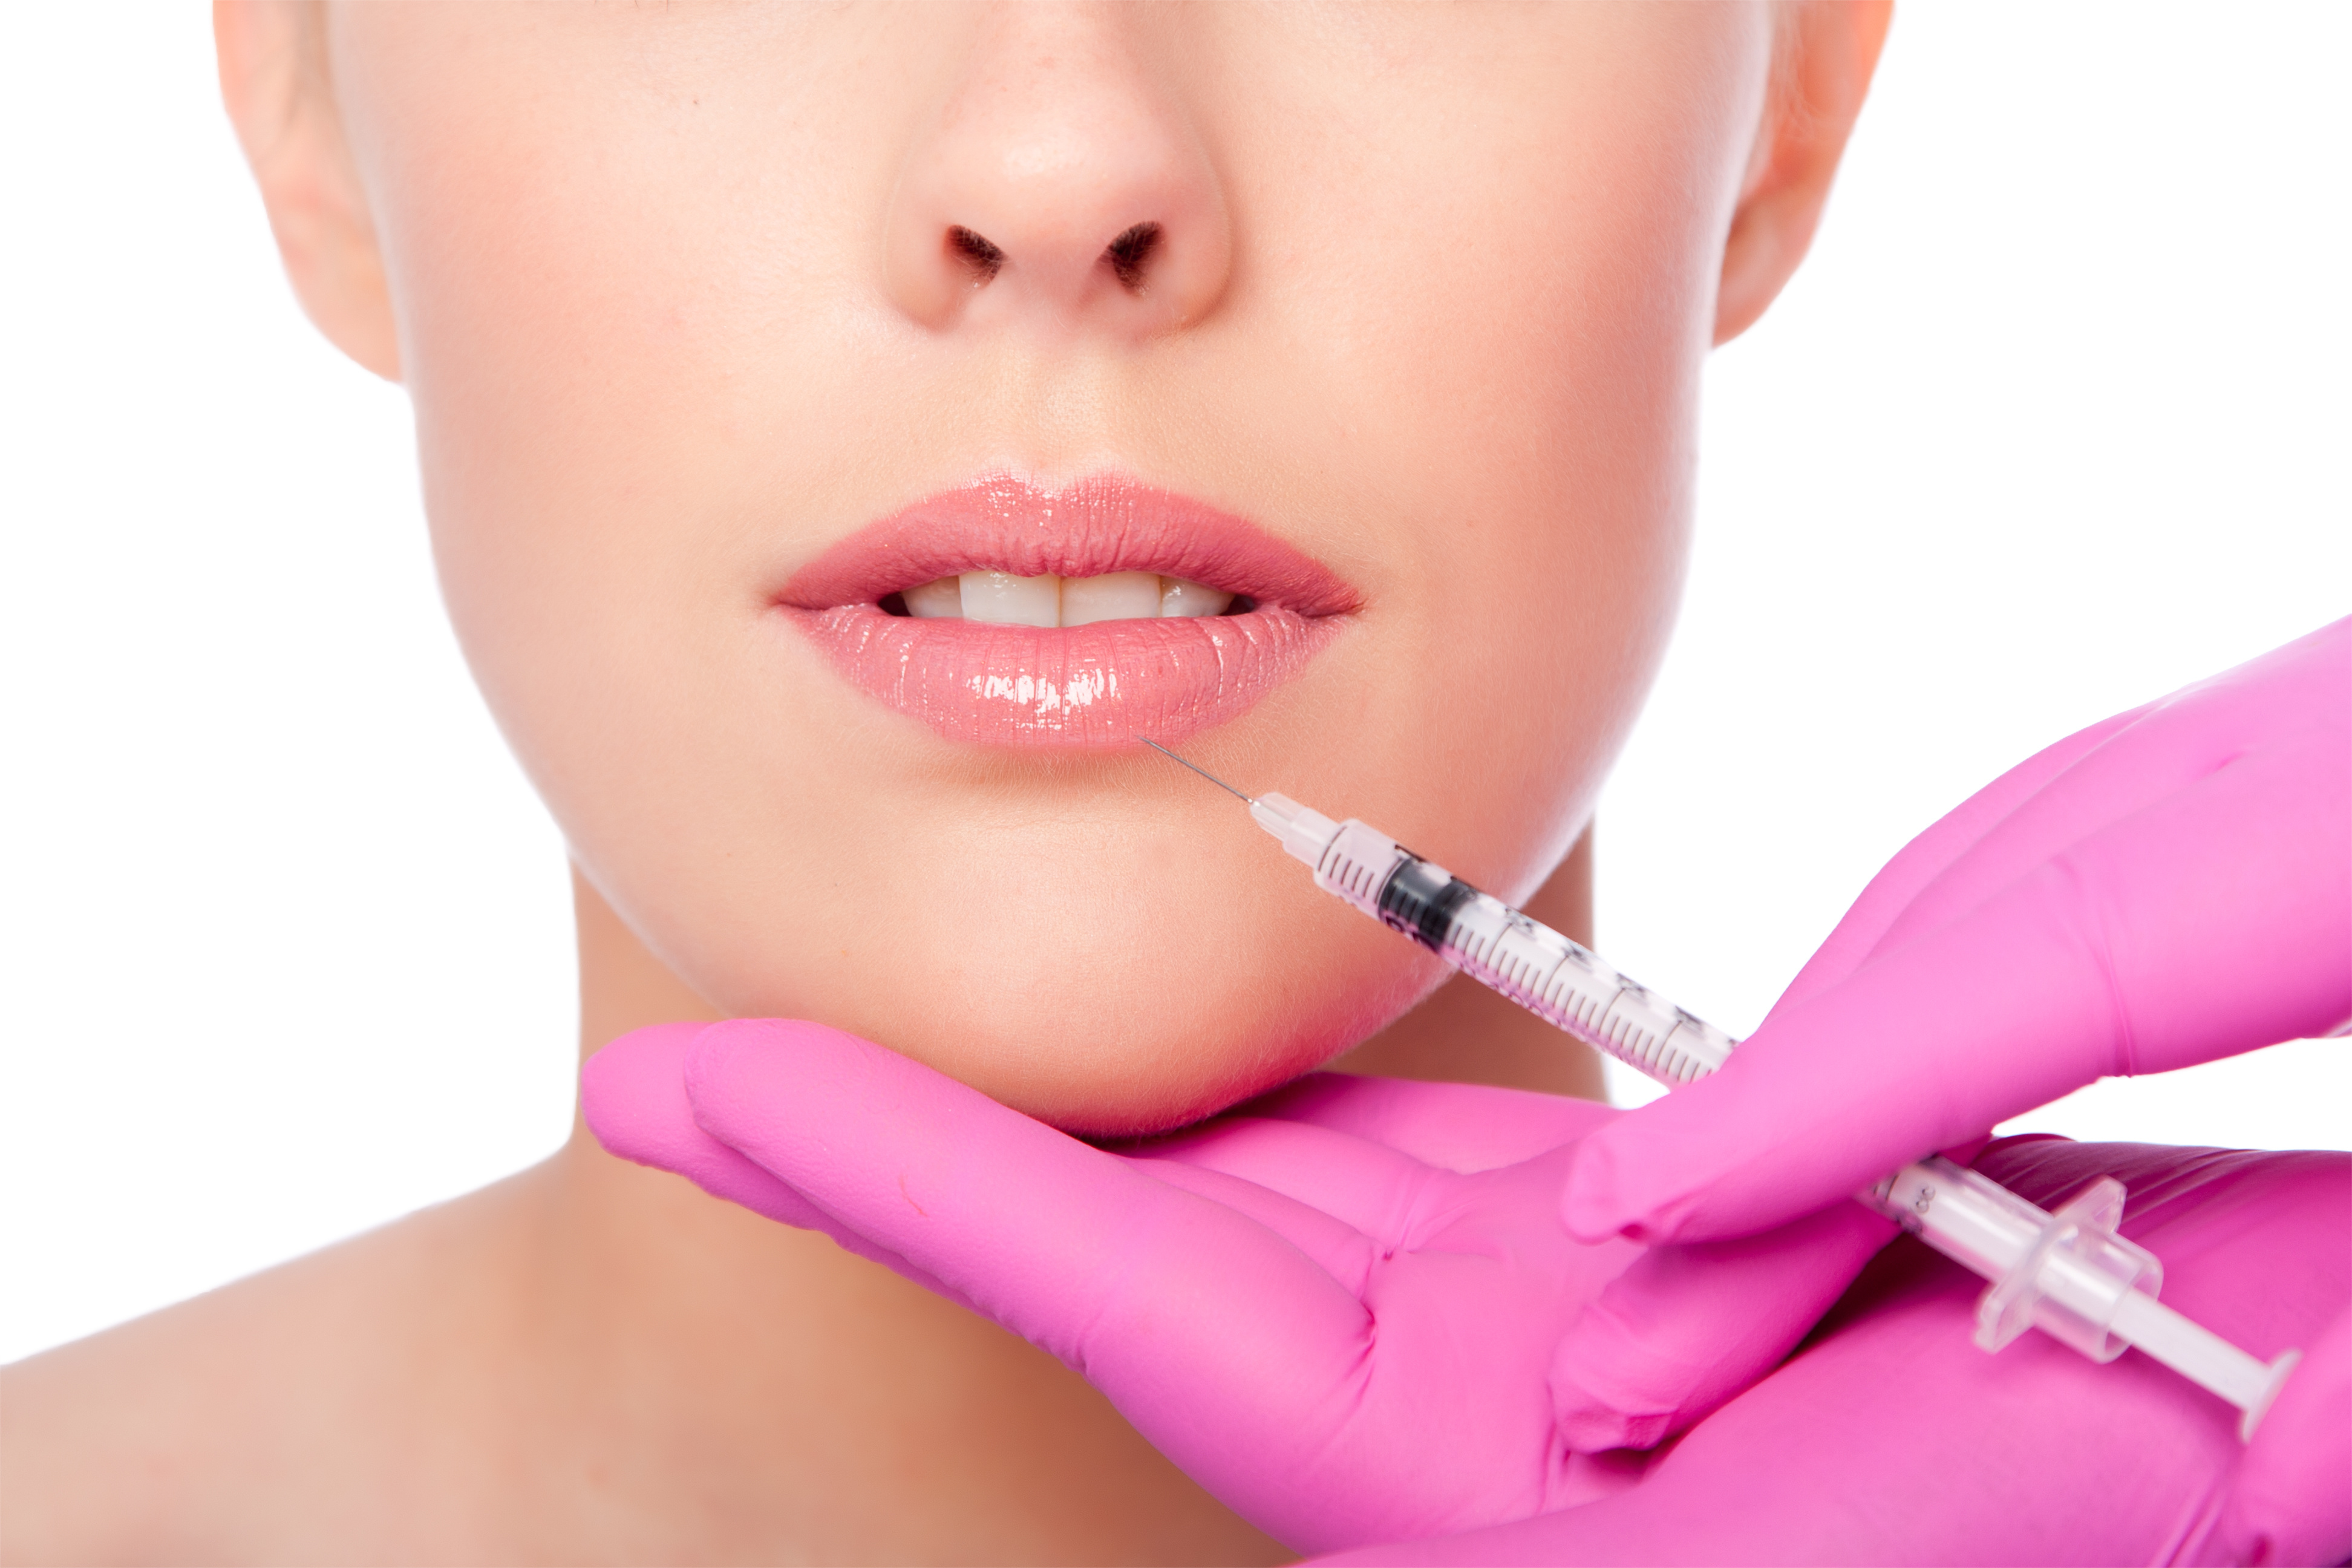 What to Expect From Your First Lip Filler Treatment - My Botox LA Med Spa  News & Articles